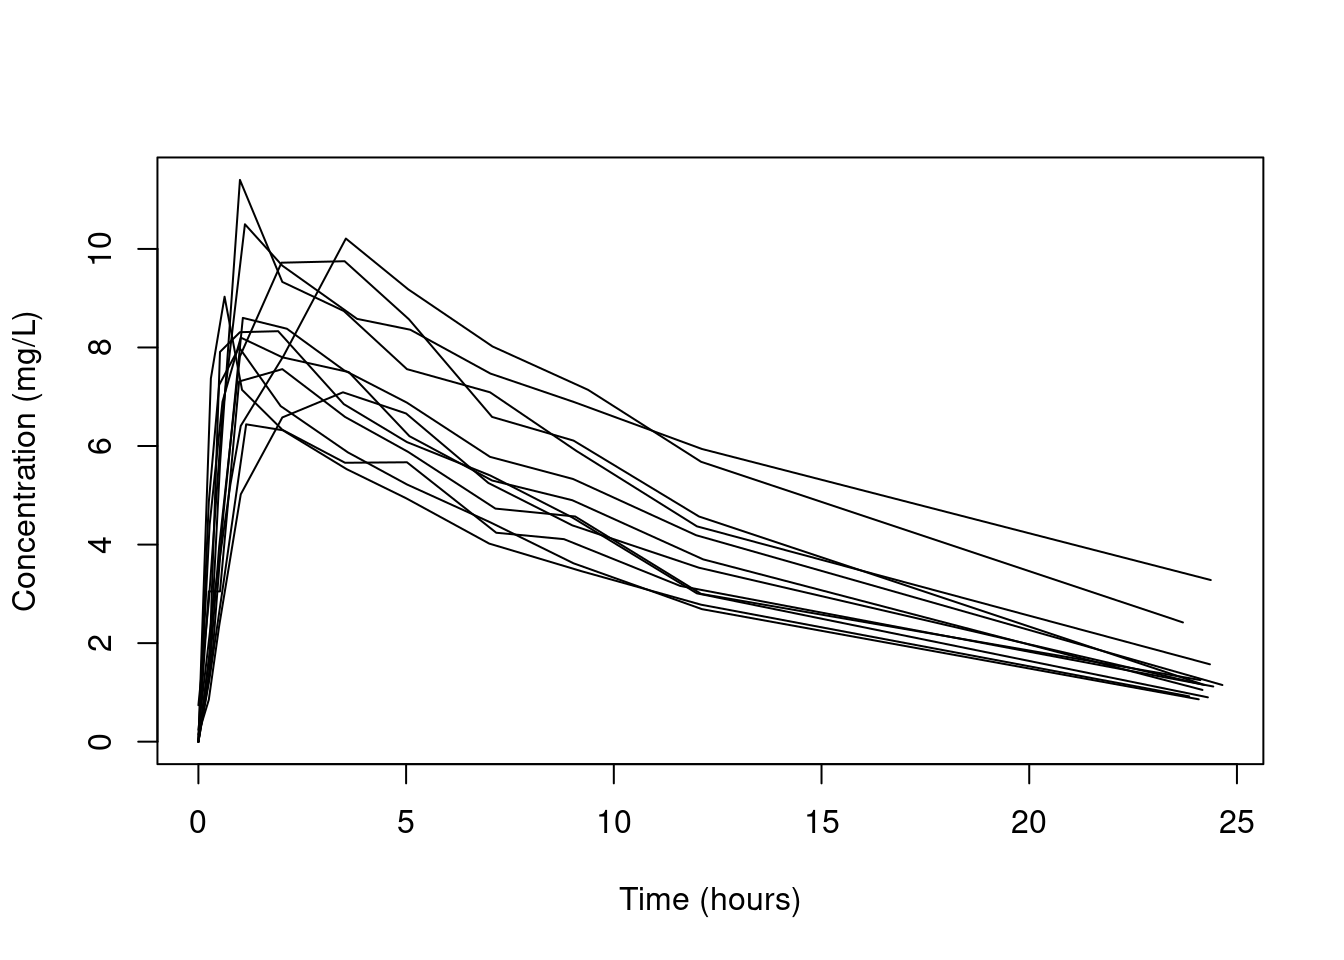 Concentration of theophylline against time for each of the individuals in the study